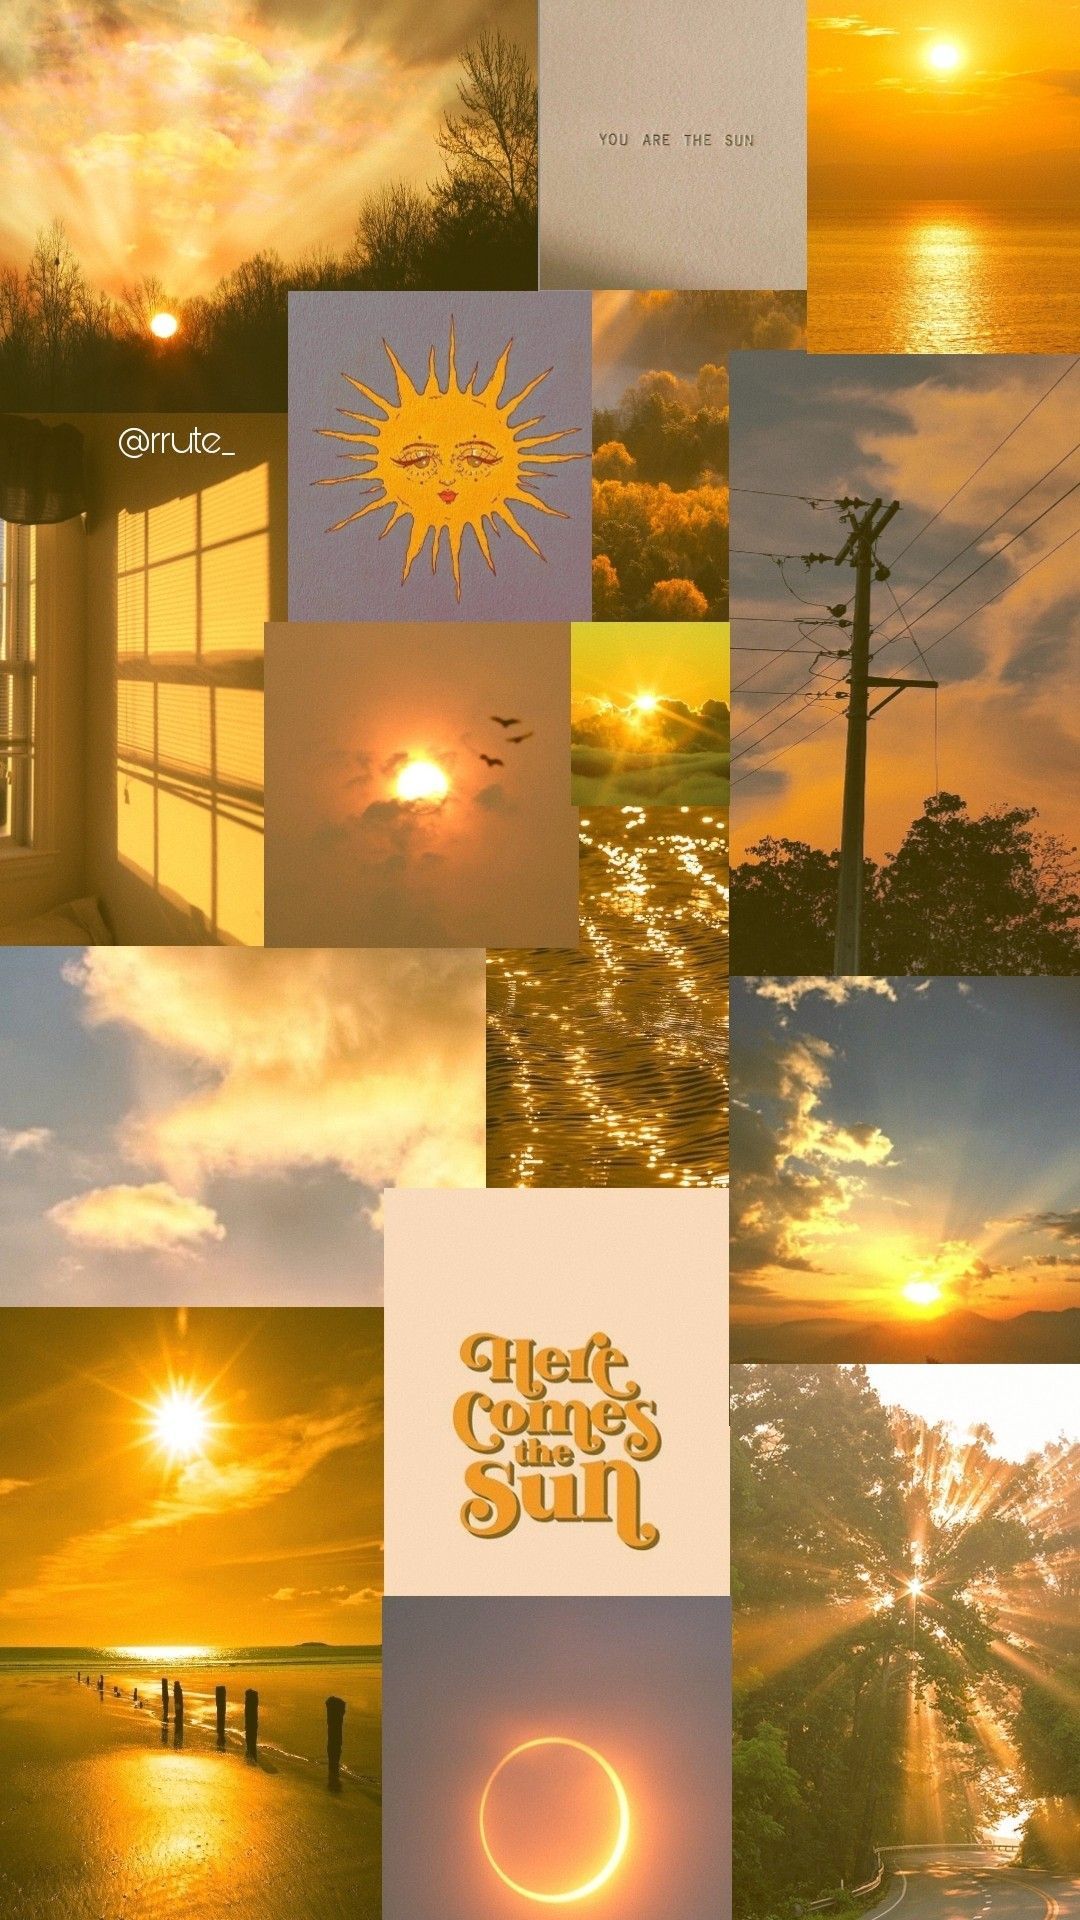 Aesthetic collage of golden sunsets and sun illustrations - Sun